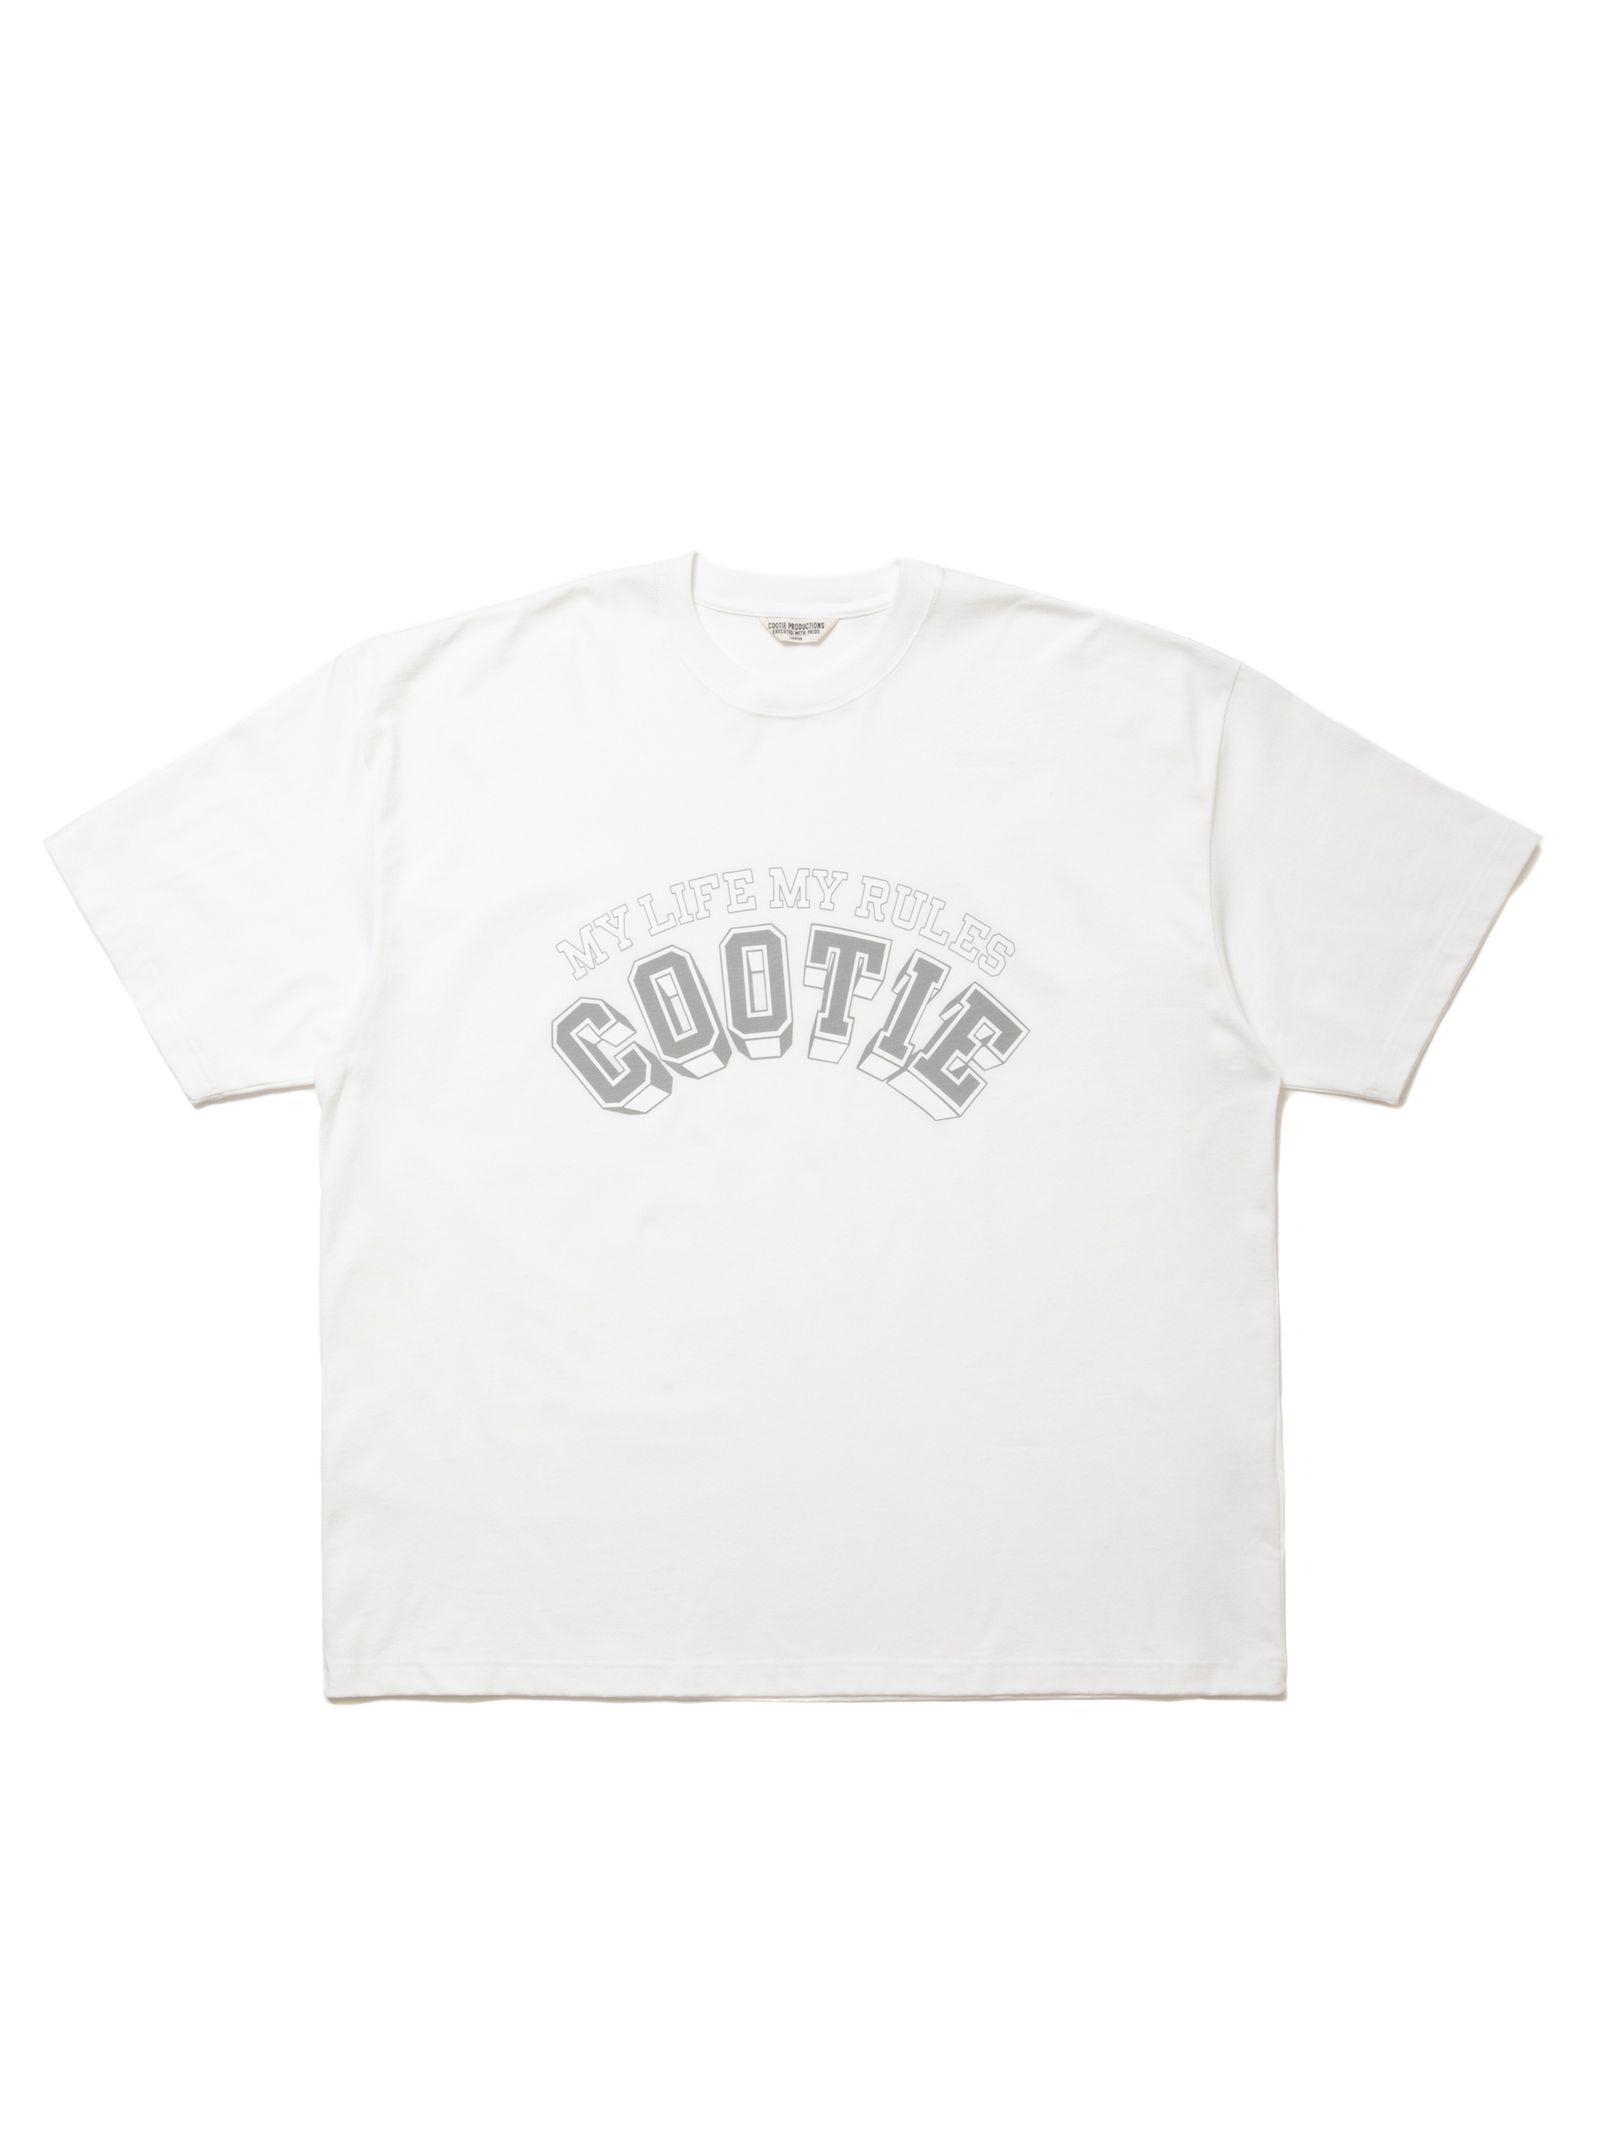 COOTIE PRODUCTIONS - Open End Yarn Print S/S Tee (WHITE) / ロゴ プリント ビッグTシャツ  | LOOPHOLE